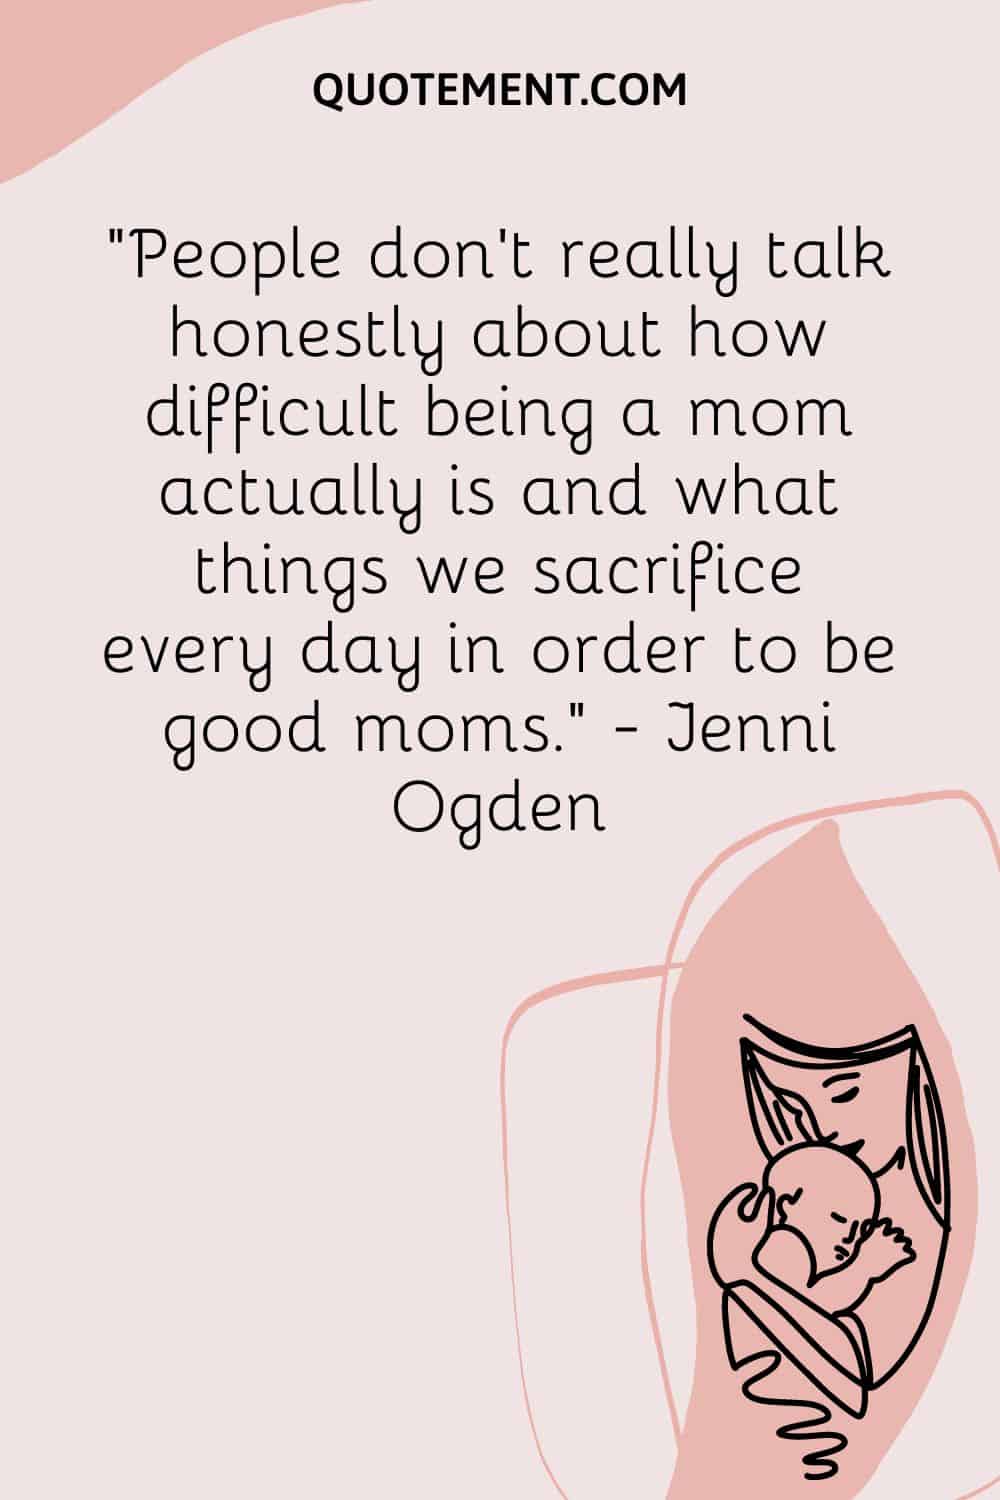 People don’t really talk honestly about how difficult being a mom actually is and what things we sacrifice every day in order to be good moms